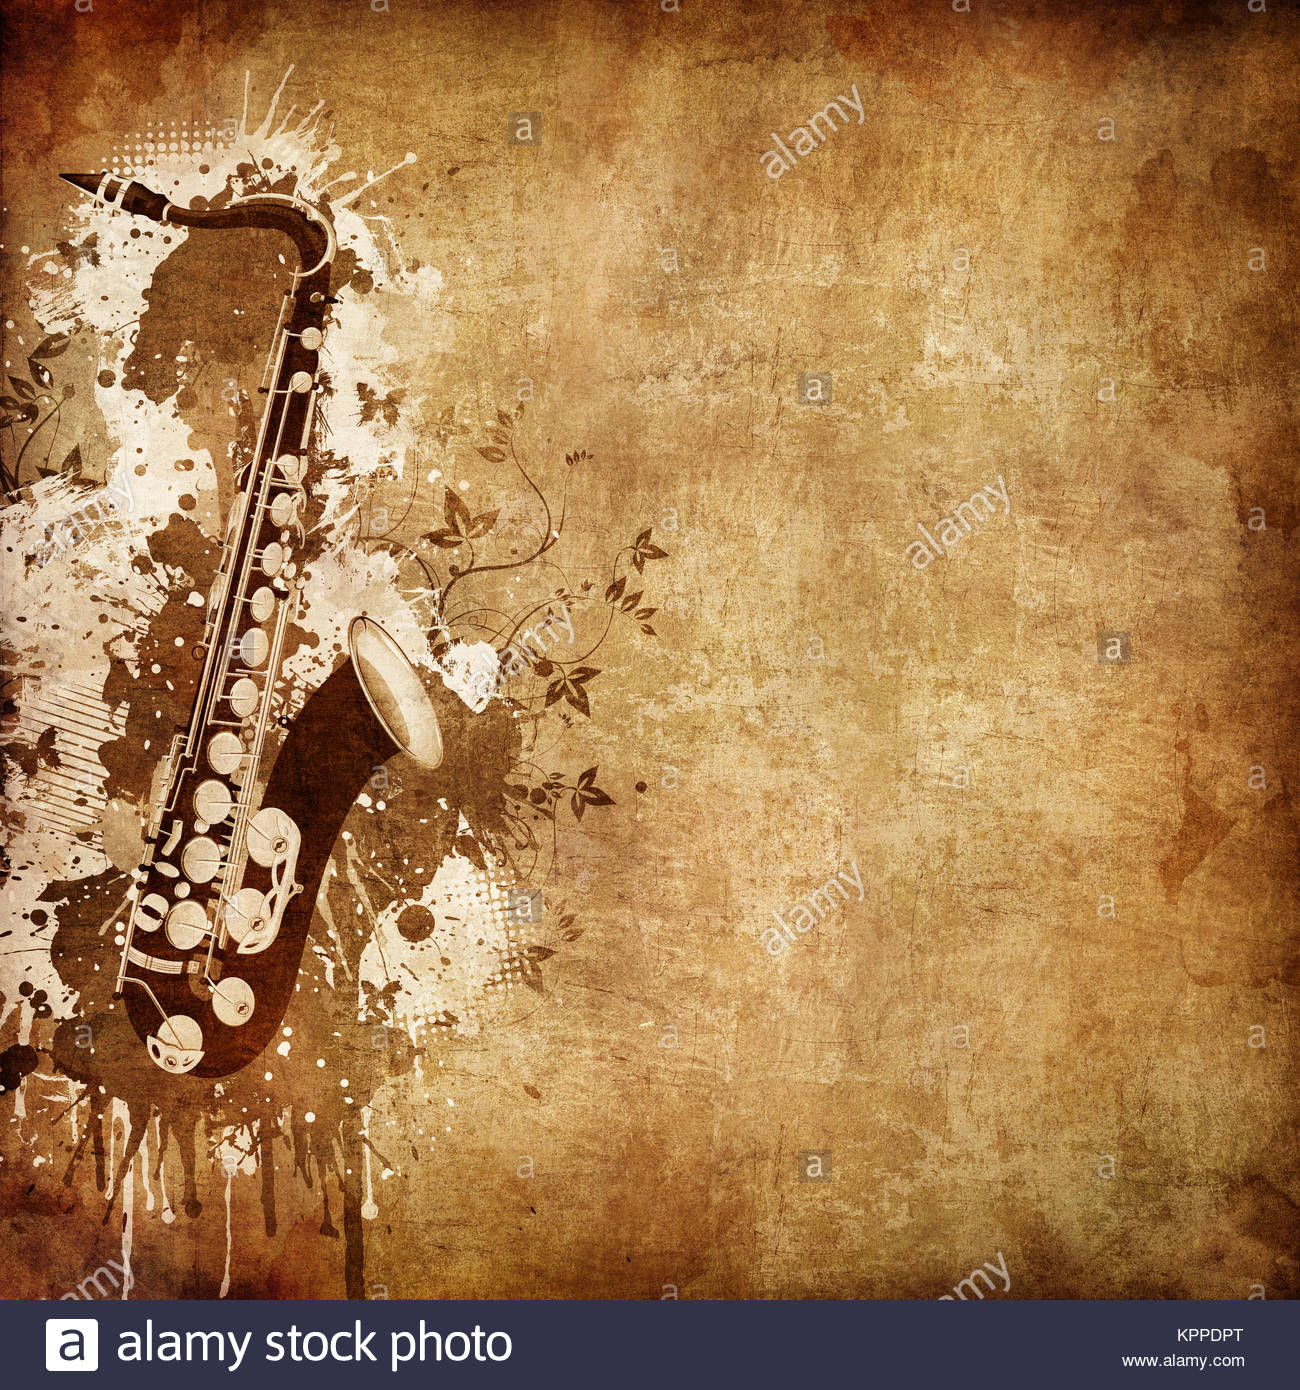 Old Paper Retro Music Texture Background With Jazz Saxophone